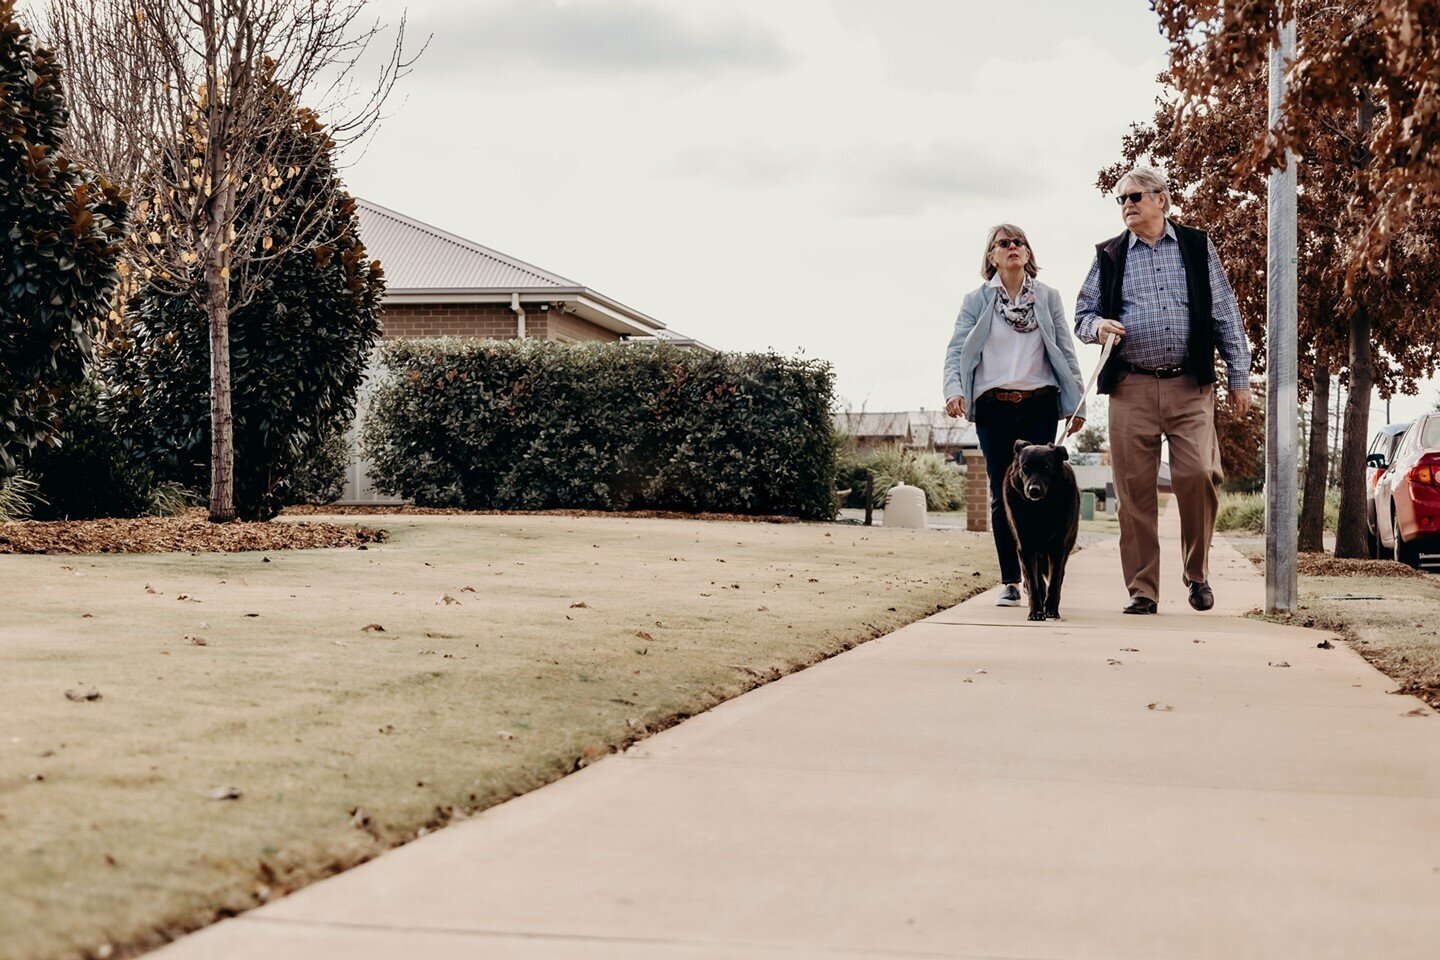 Take a walk through Macquarie View Estate, we guarantee you won't want to leave. ⁠
⁠
Wait are you waiting for? Call our agents today: ⁠
Richard Tegart 0418 634 868 @raywhitedubbo ⁠
Michael Redden 0409 844 036 @reddenfamily Real Estate ⁠
⁠
📸 : @coppe